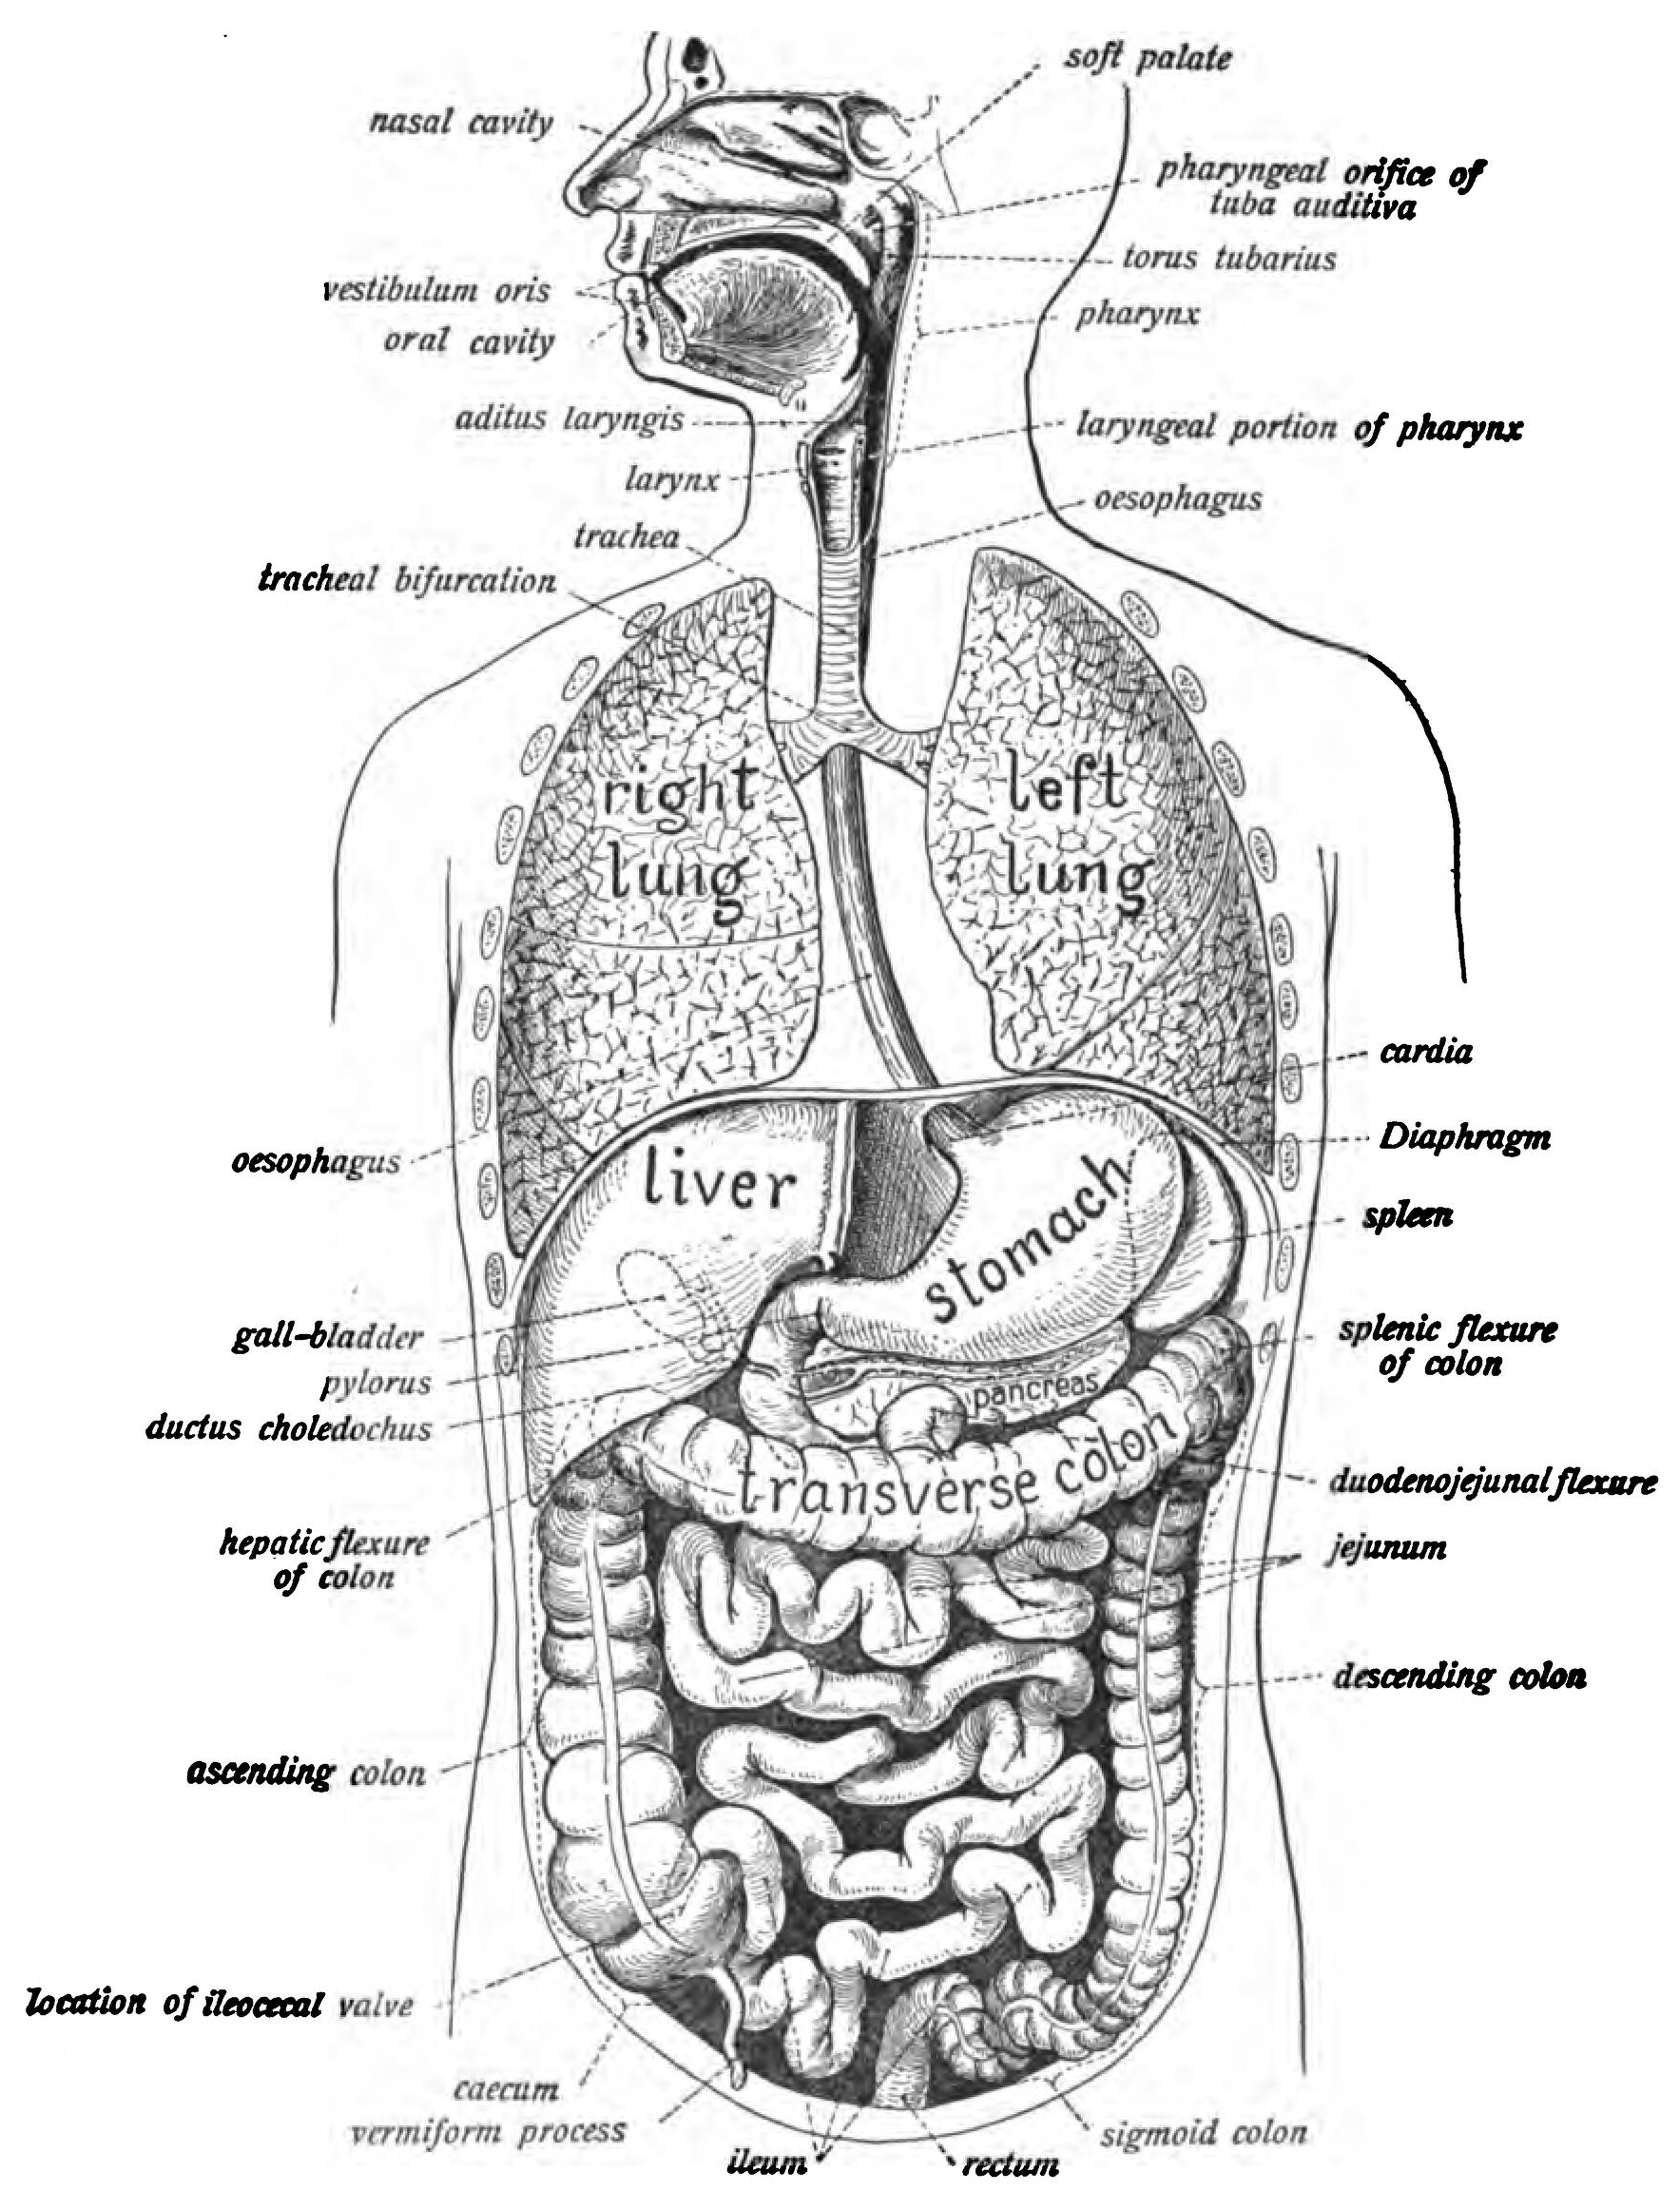 Diagram Of The Digestive System Human Digestive System Wikipedia